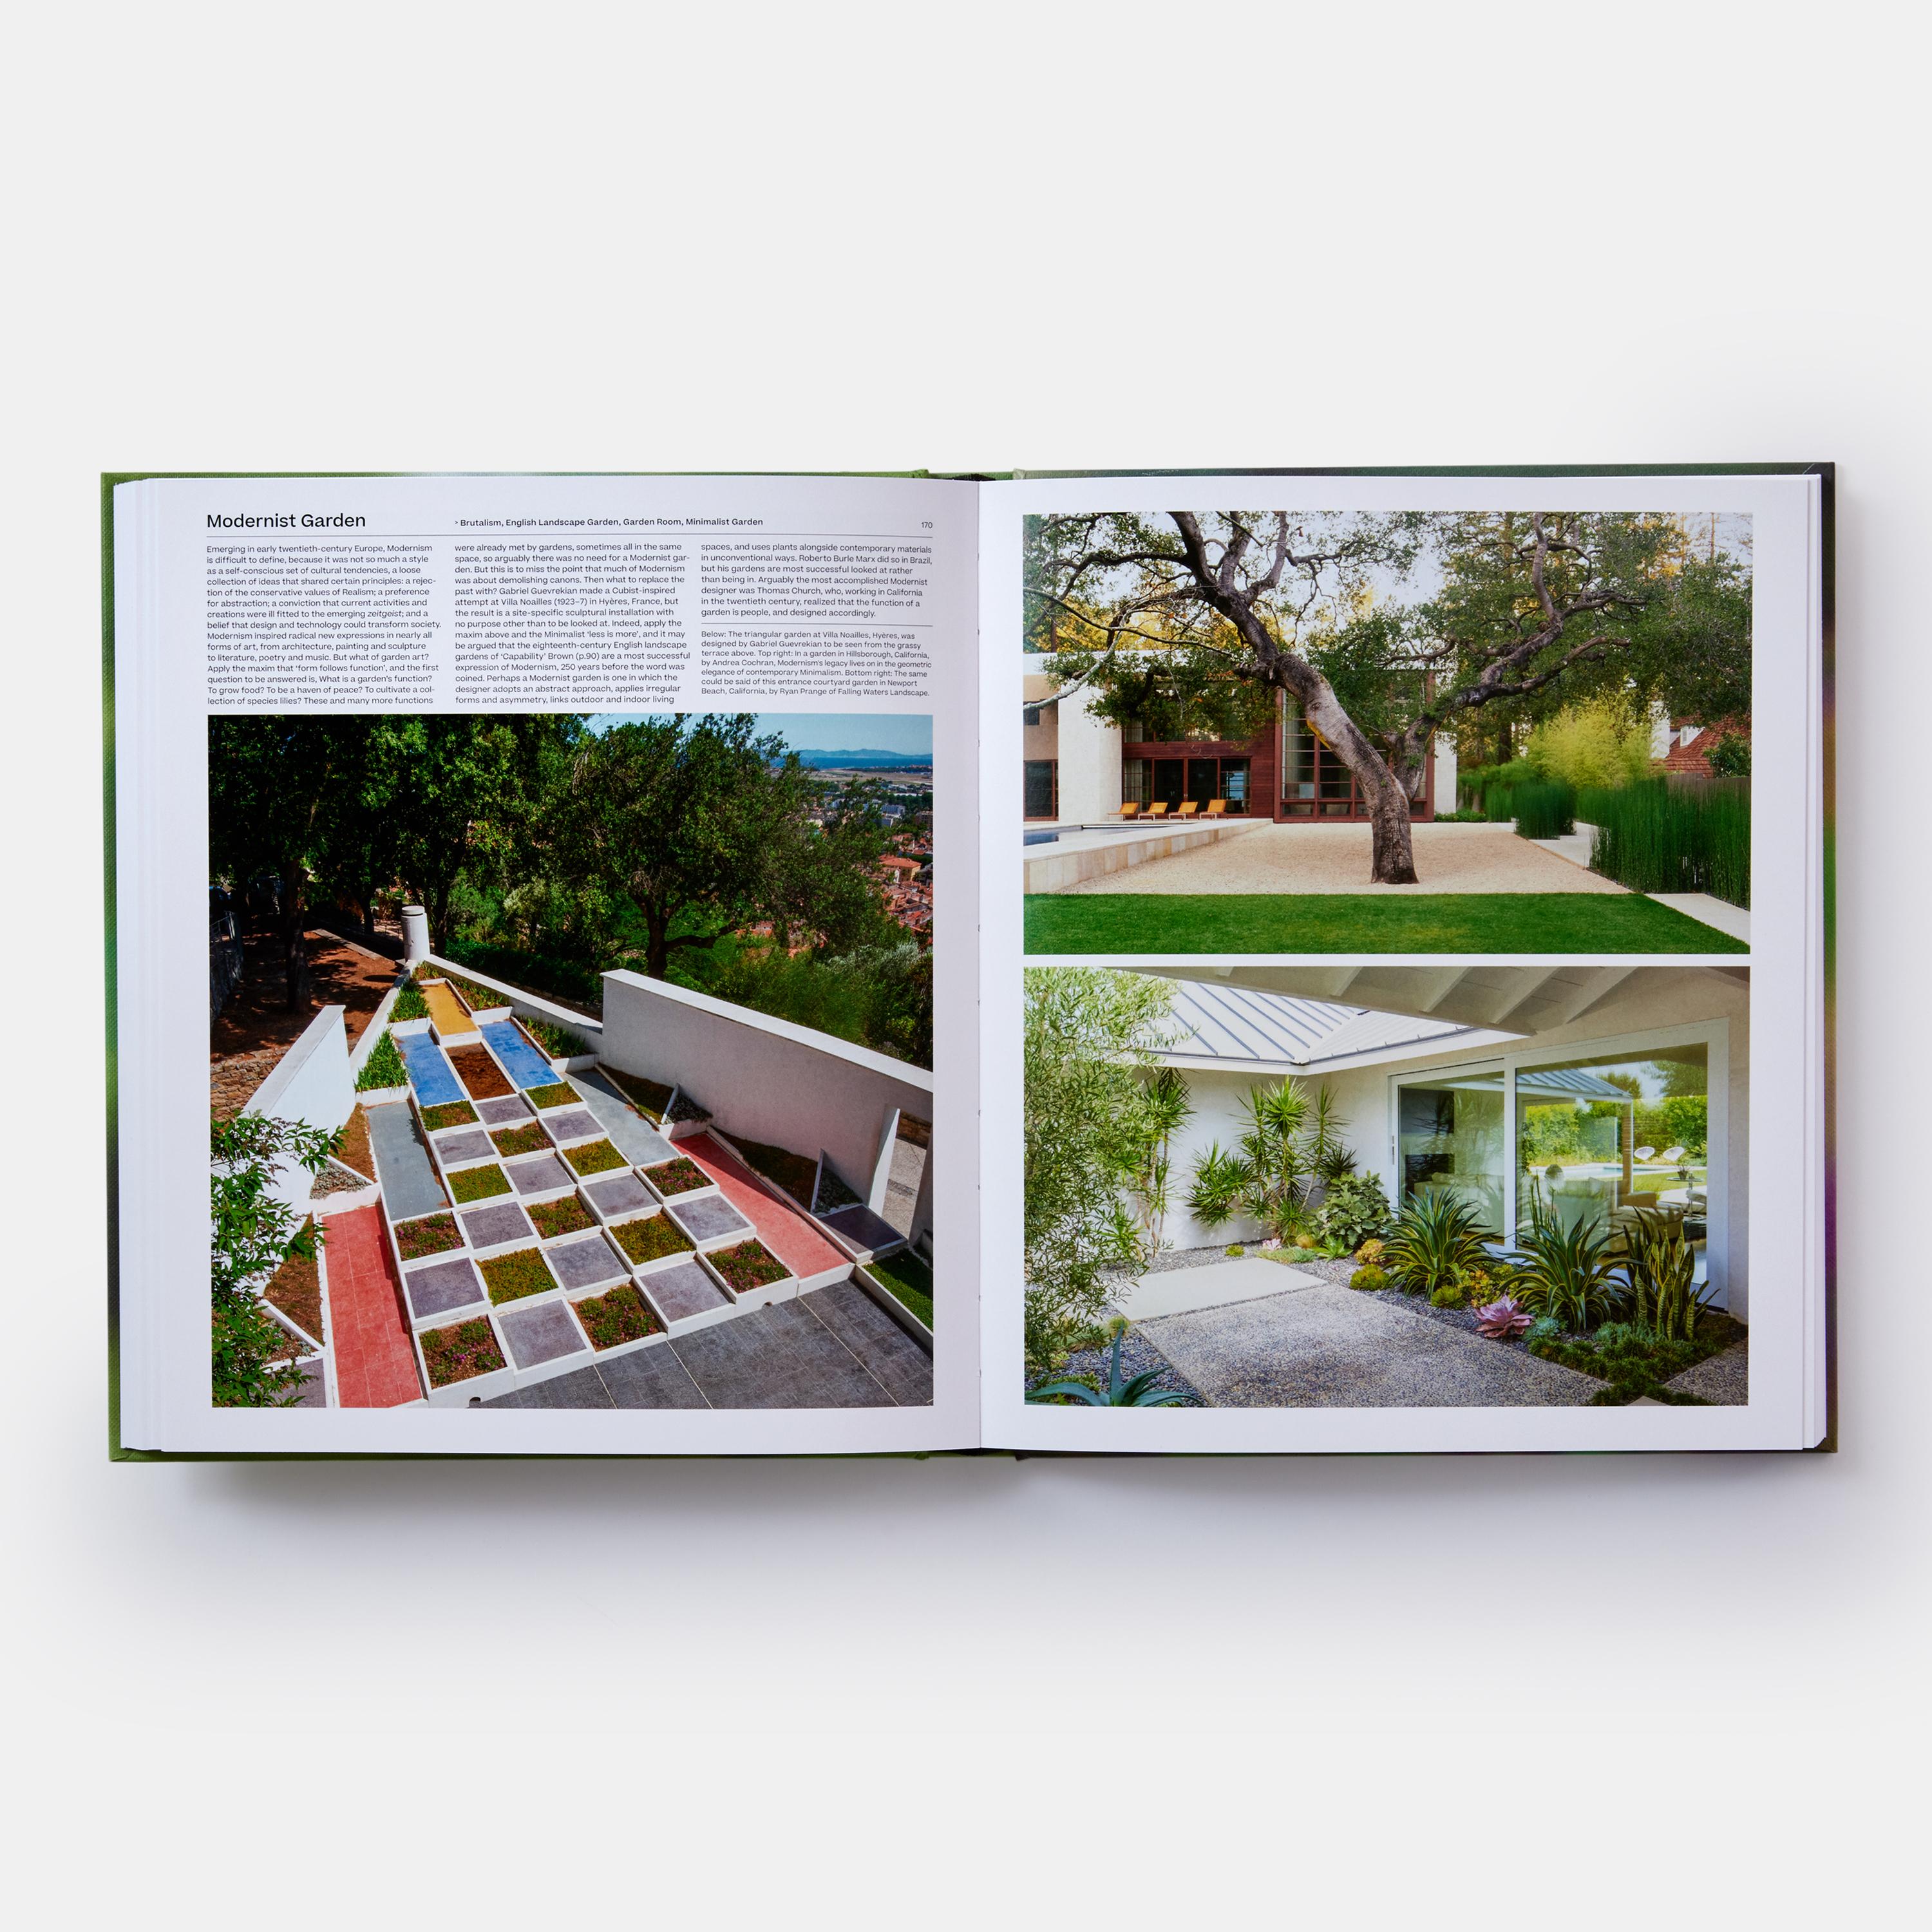 The definitive reference guide to garden design, its rich history, and the creative art of gardening – a luxuriously illustrated A-Z compendium of more than 200 garden elements, styles, features, and ornaments for gardeners around the globe

With